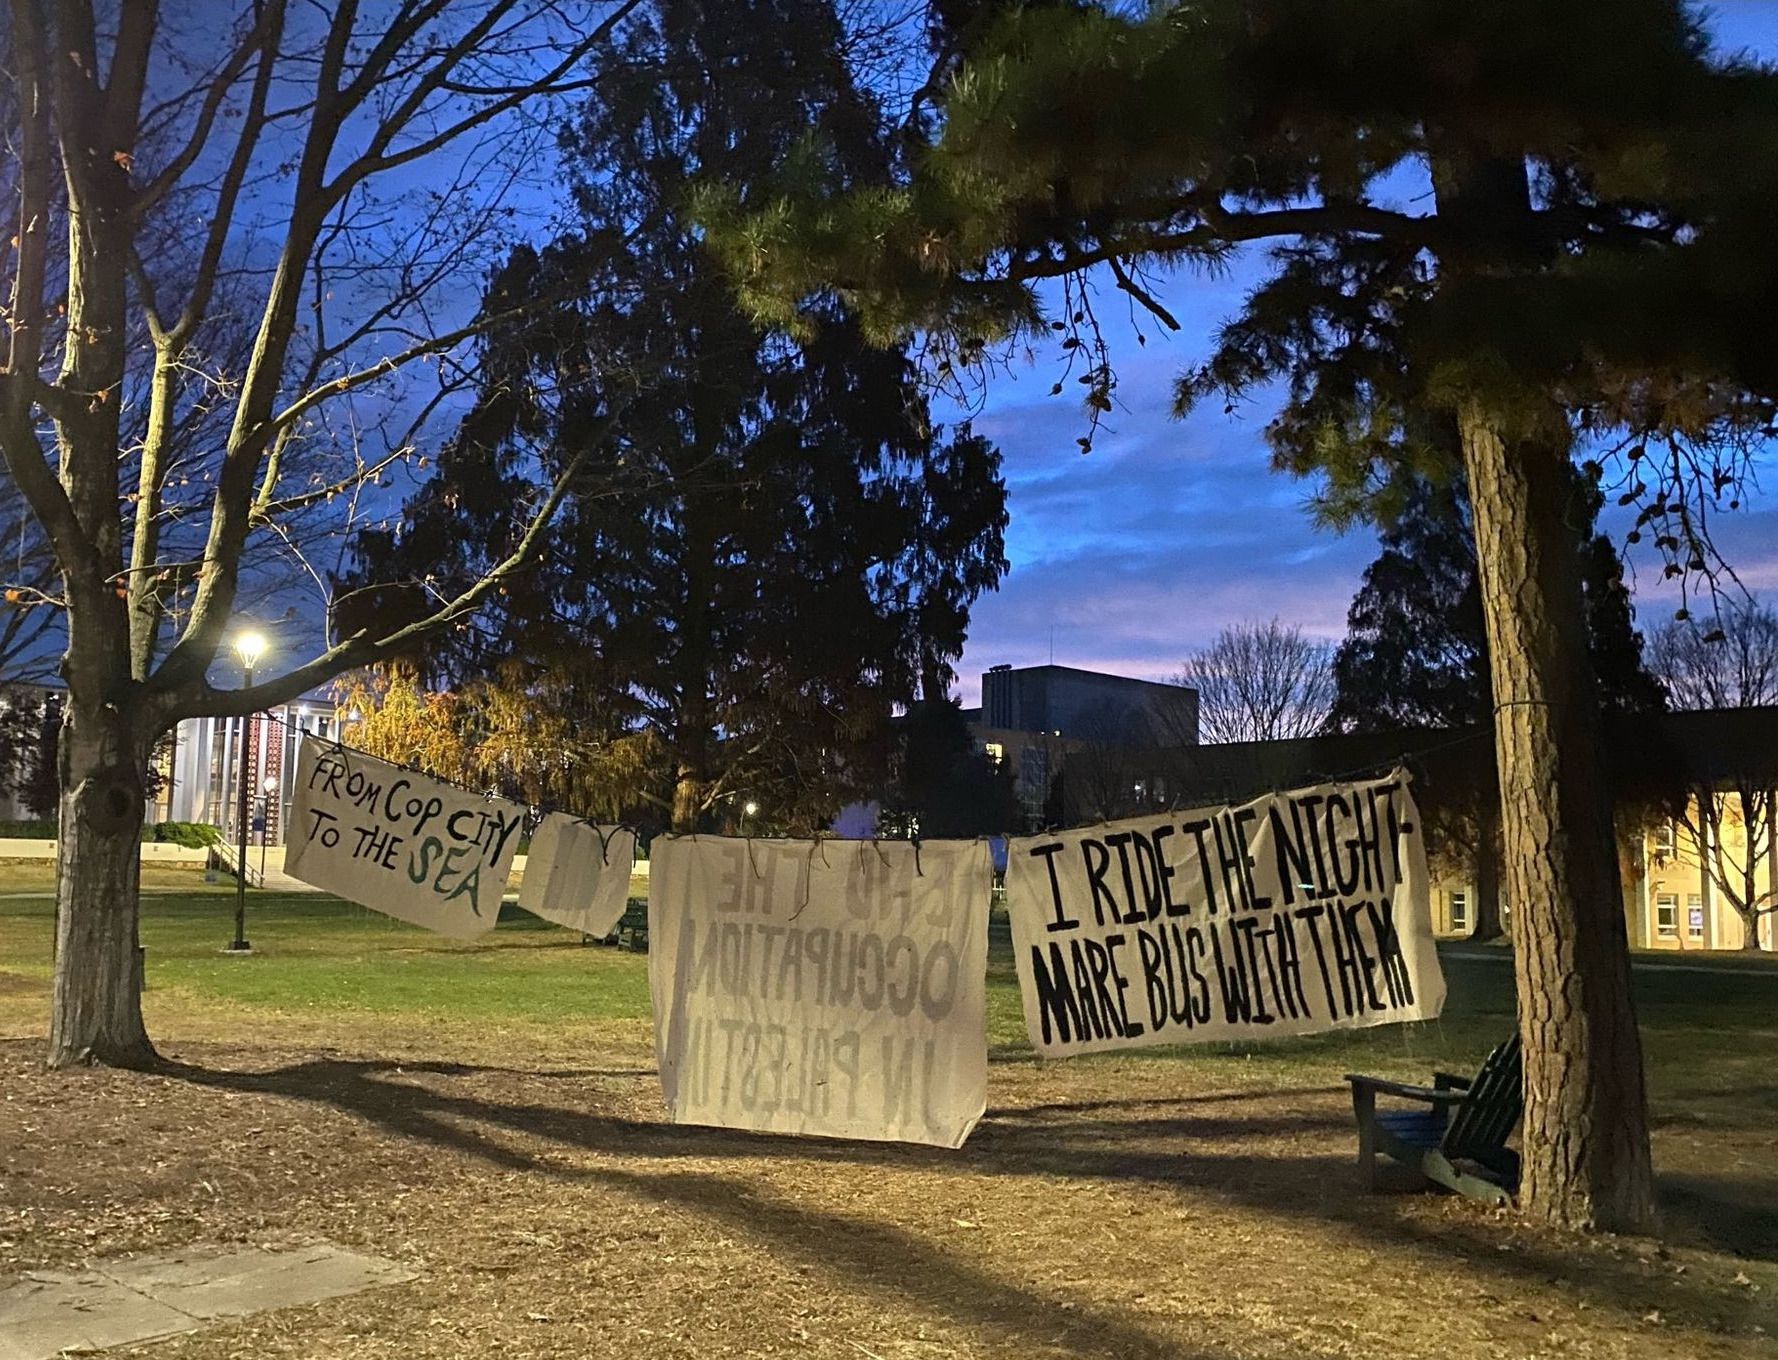 Four painted white banners of various sizes hang from a rope between two trees in front of Karpen Hall on the UNC Asheville campus. The banners facing the viewer read, "From Cop City To The Sea" and "I Ride The Nightmare Bus With Them."".